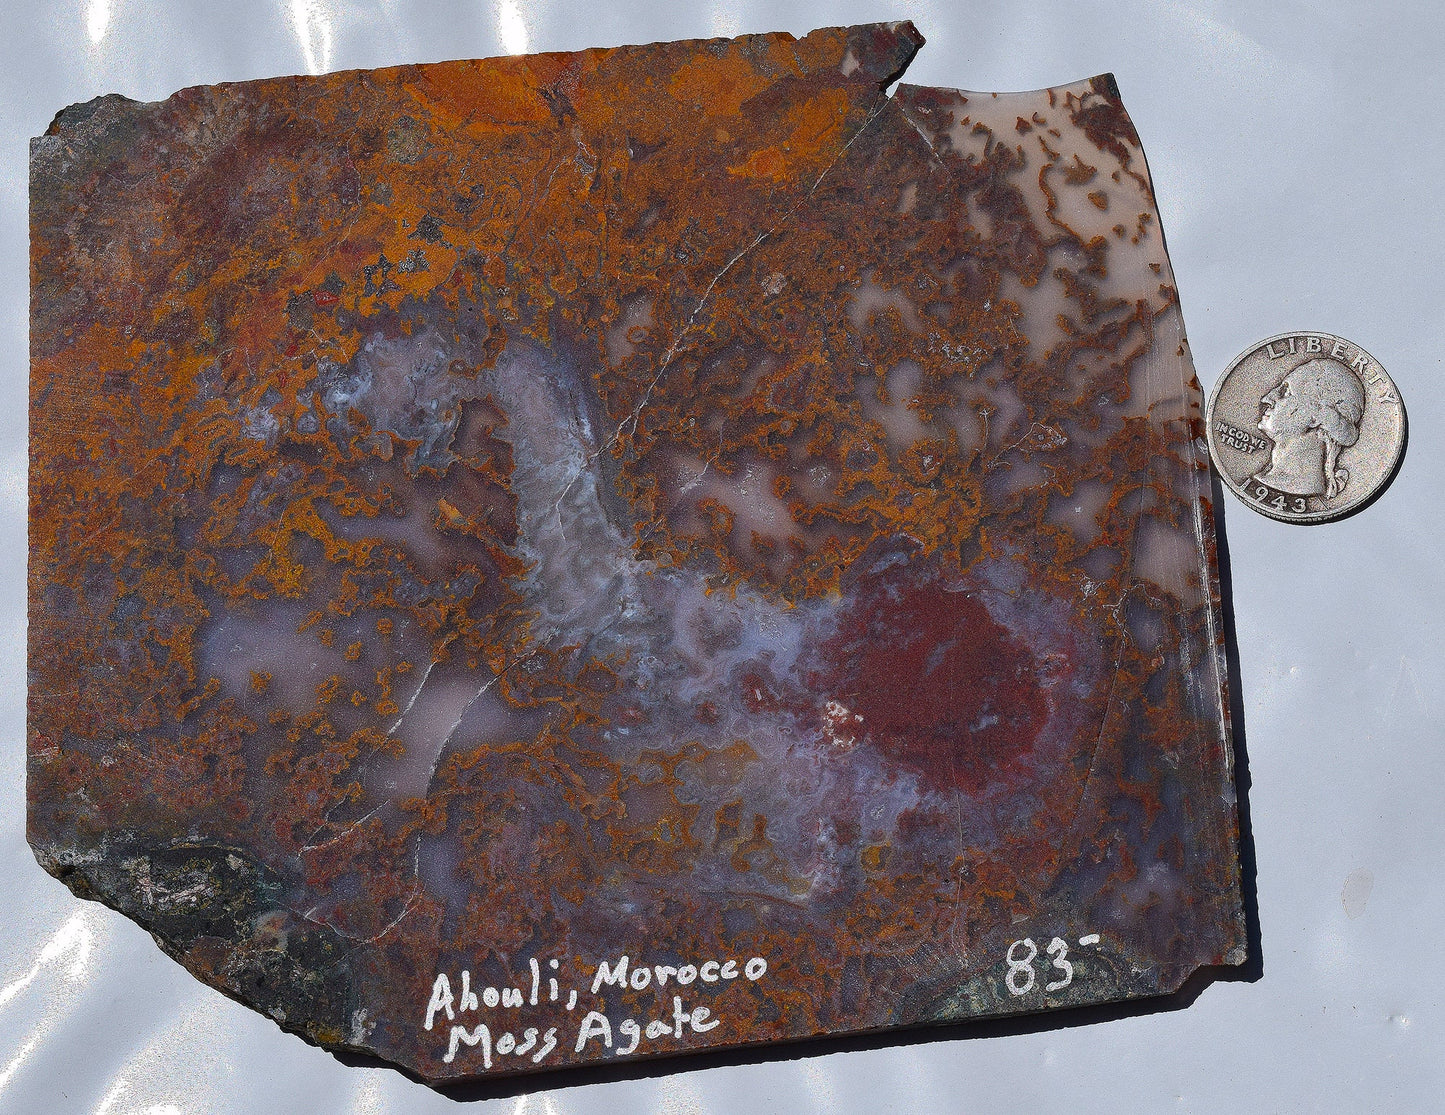 Rare, multi-colored moss agate from the Ahouli beds in Morocco. #3